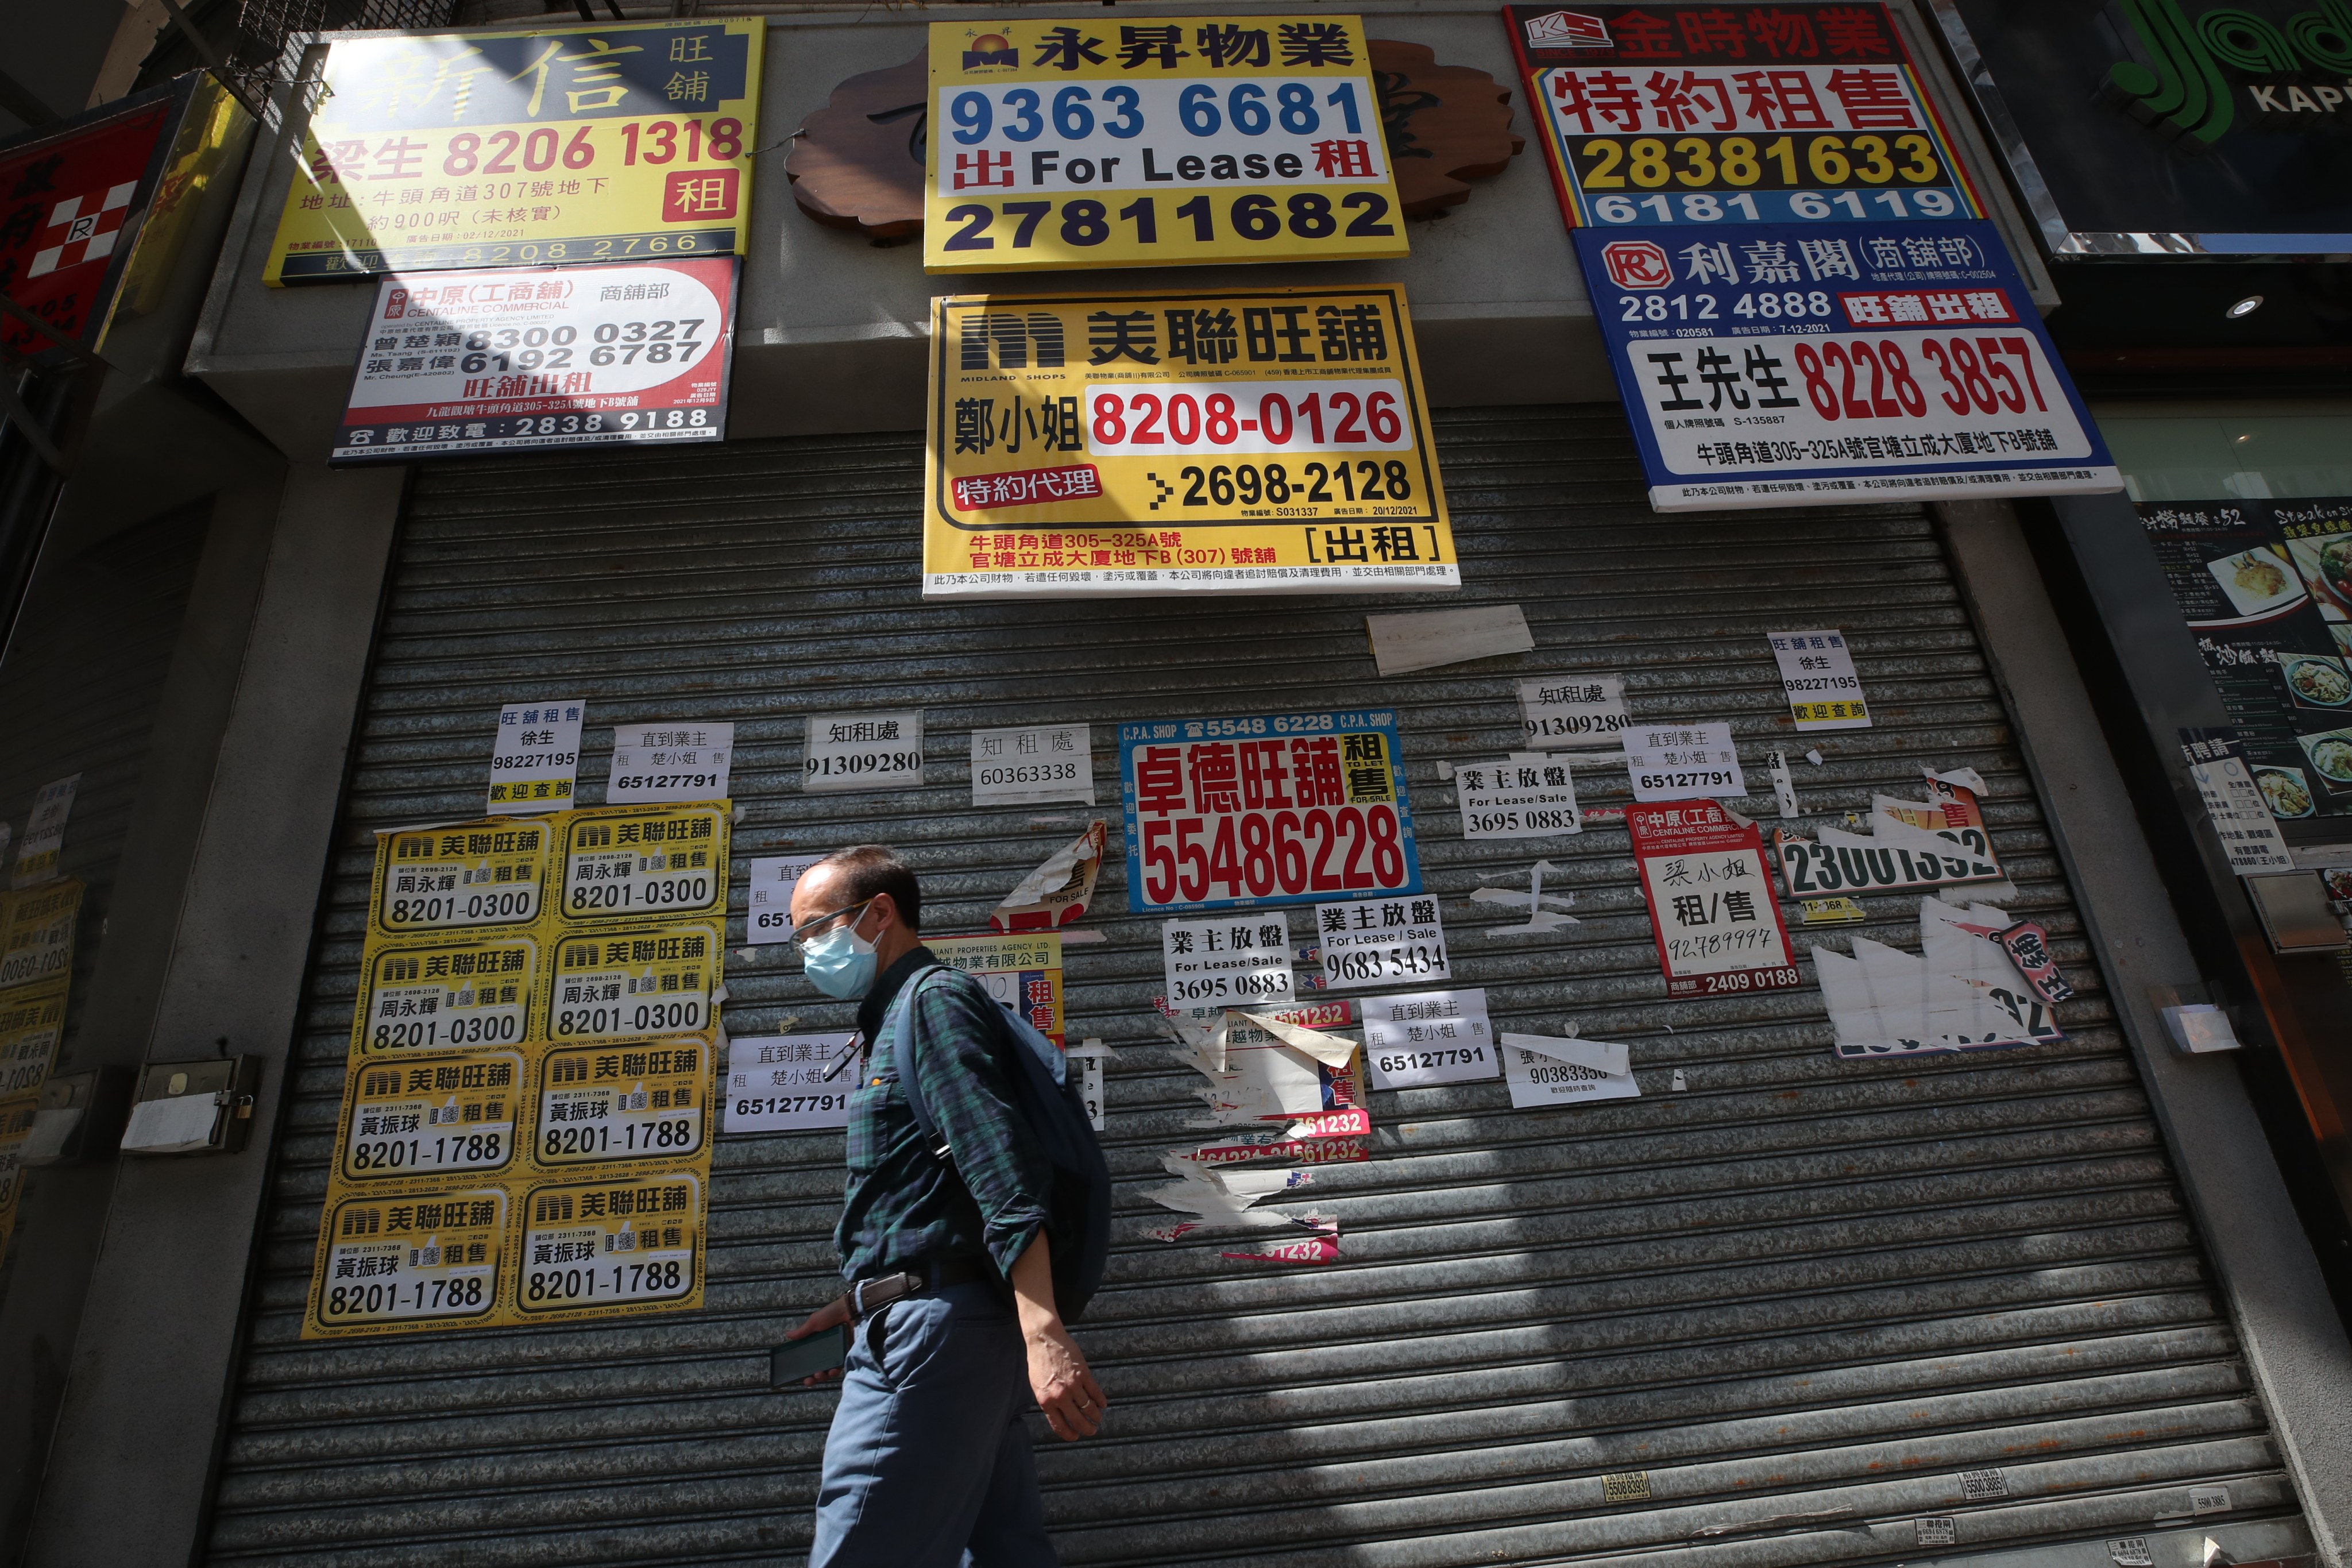 A pedestrian walks past closed retail shops in Kwun Tong on March 31. The retail sector is among the hardest-hit as businesses across Hong Kong struggle to survive amid the city’s many pandemic restrictions. Photo: Edmond So